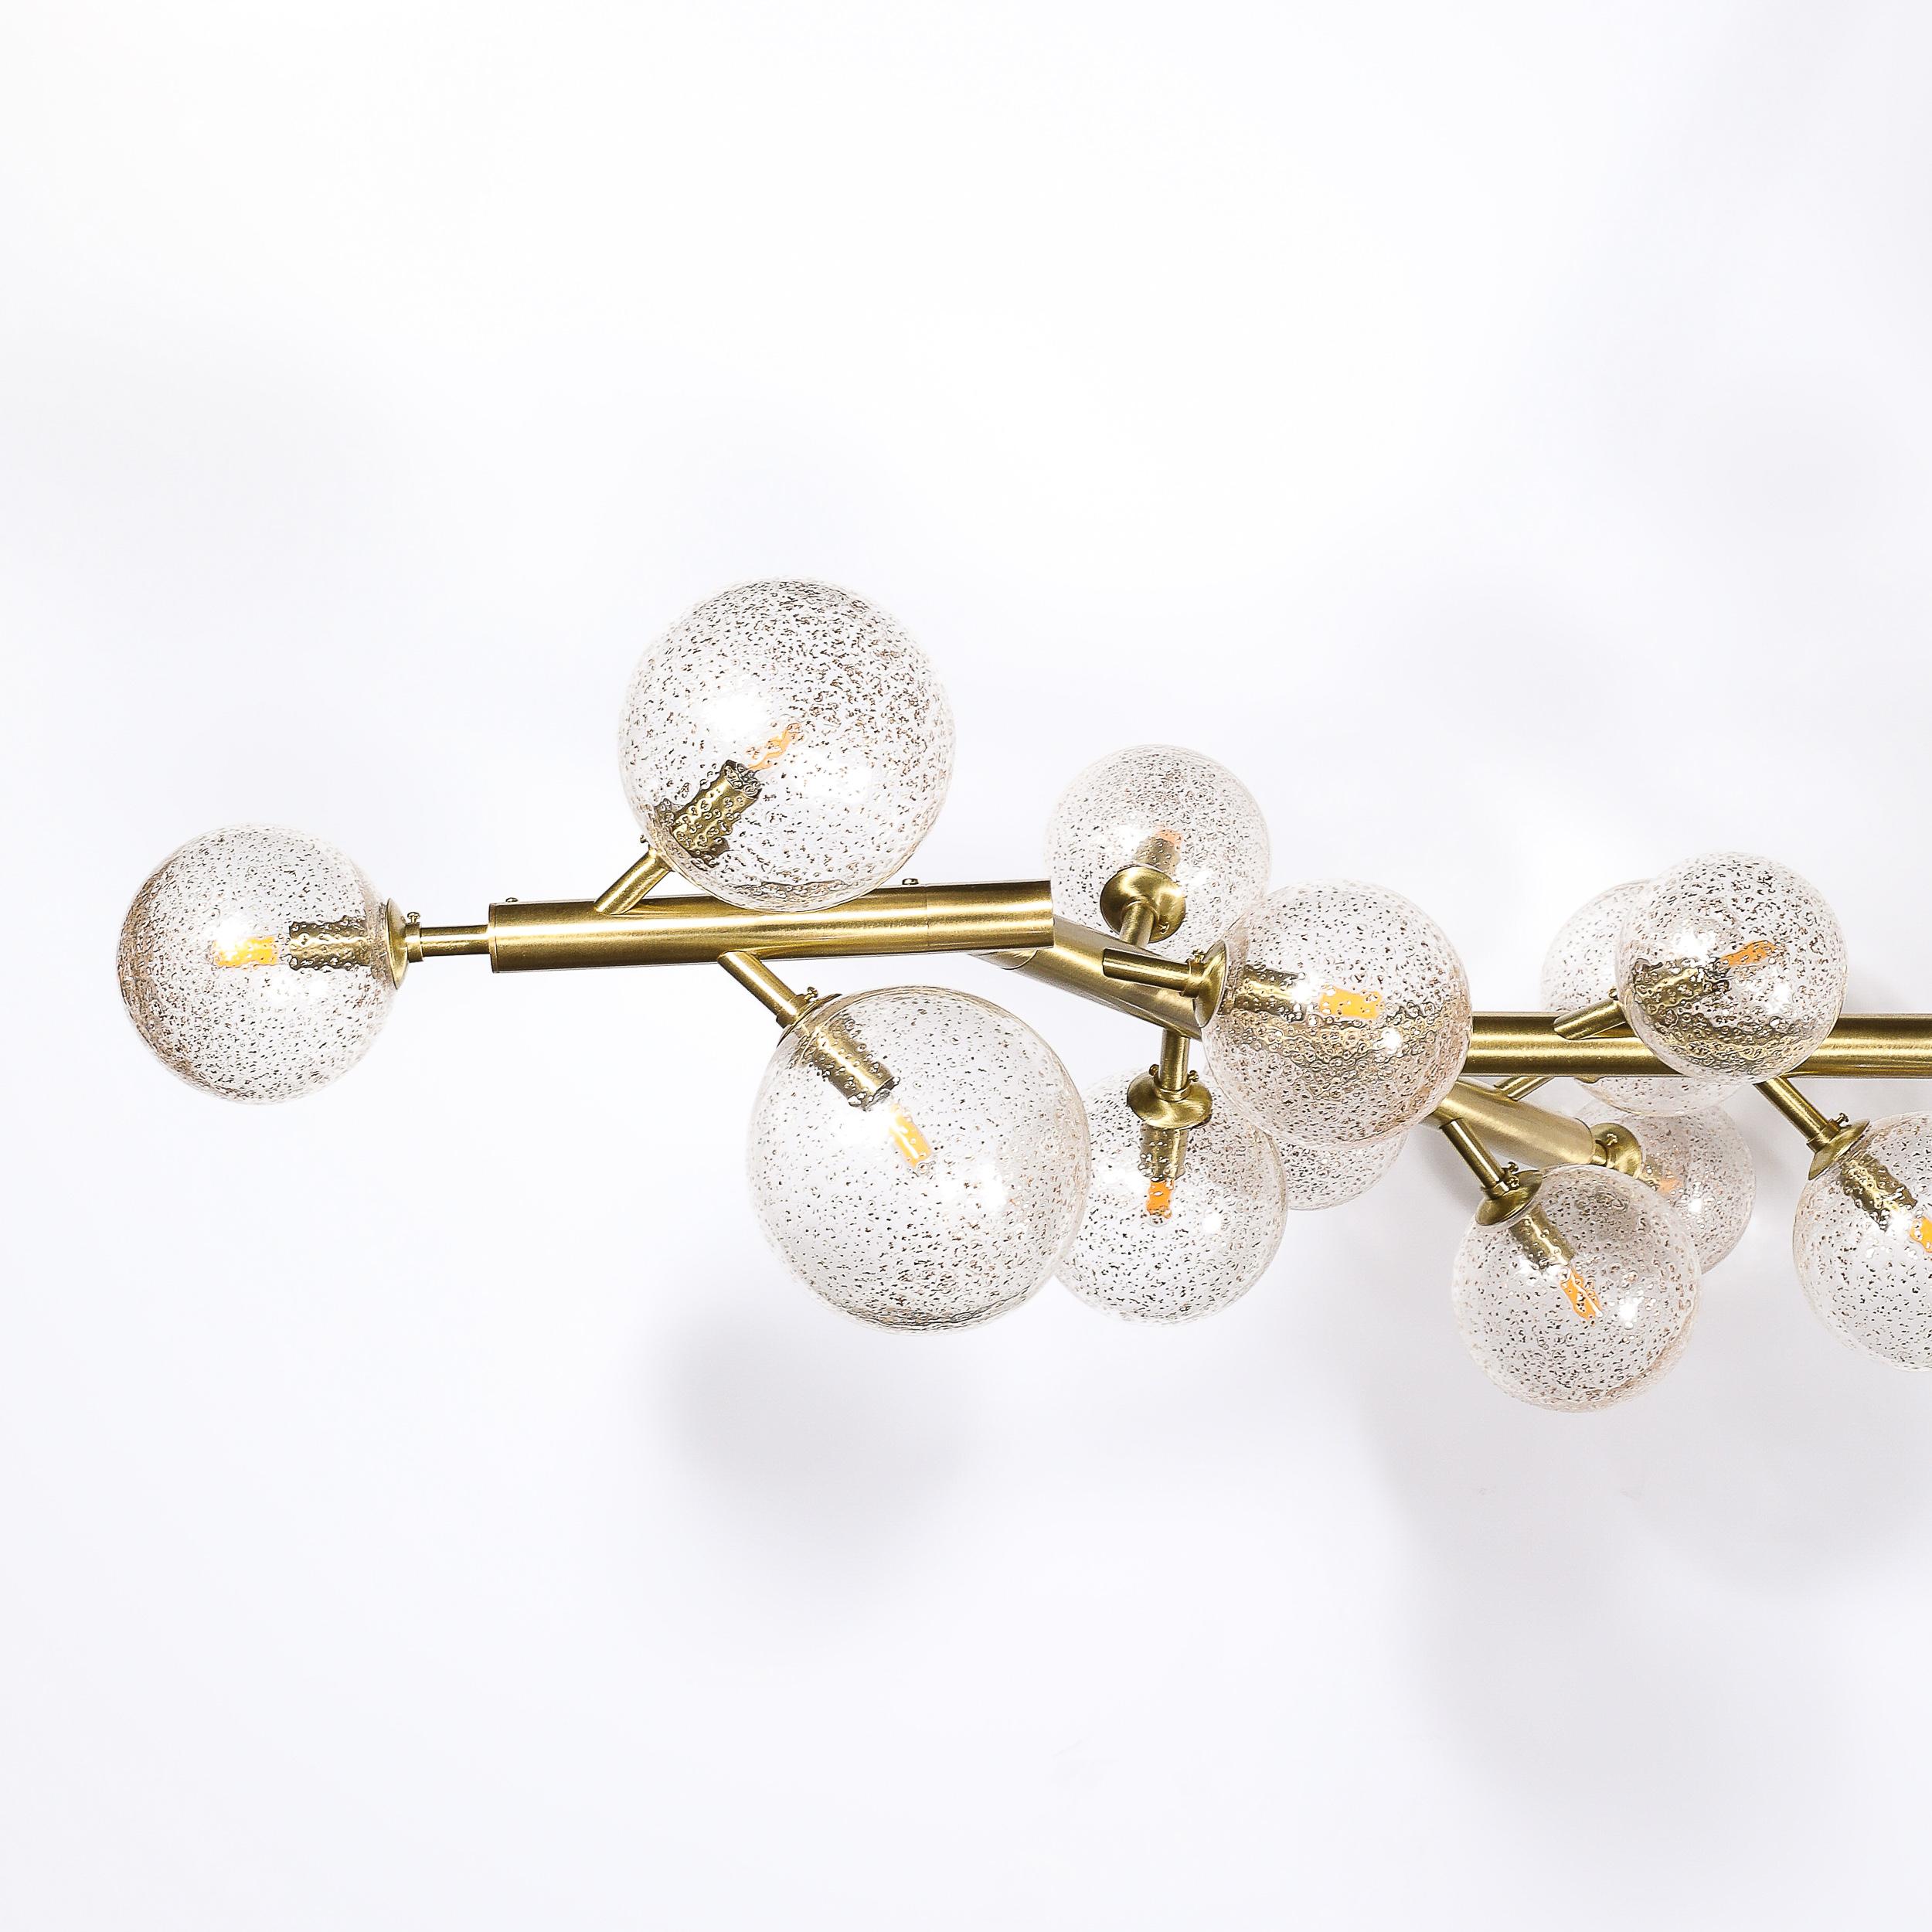 Custom Branch Form Hand-blown Murano Glass w/ 24k Gold & Brass Fitted Chandelier For Sale 4